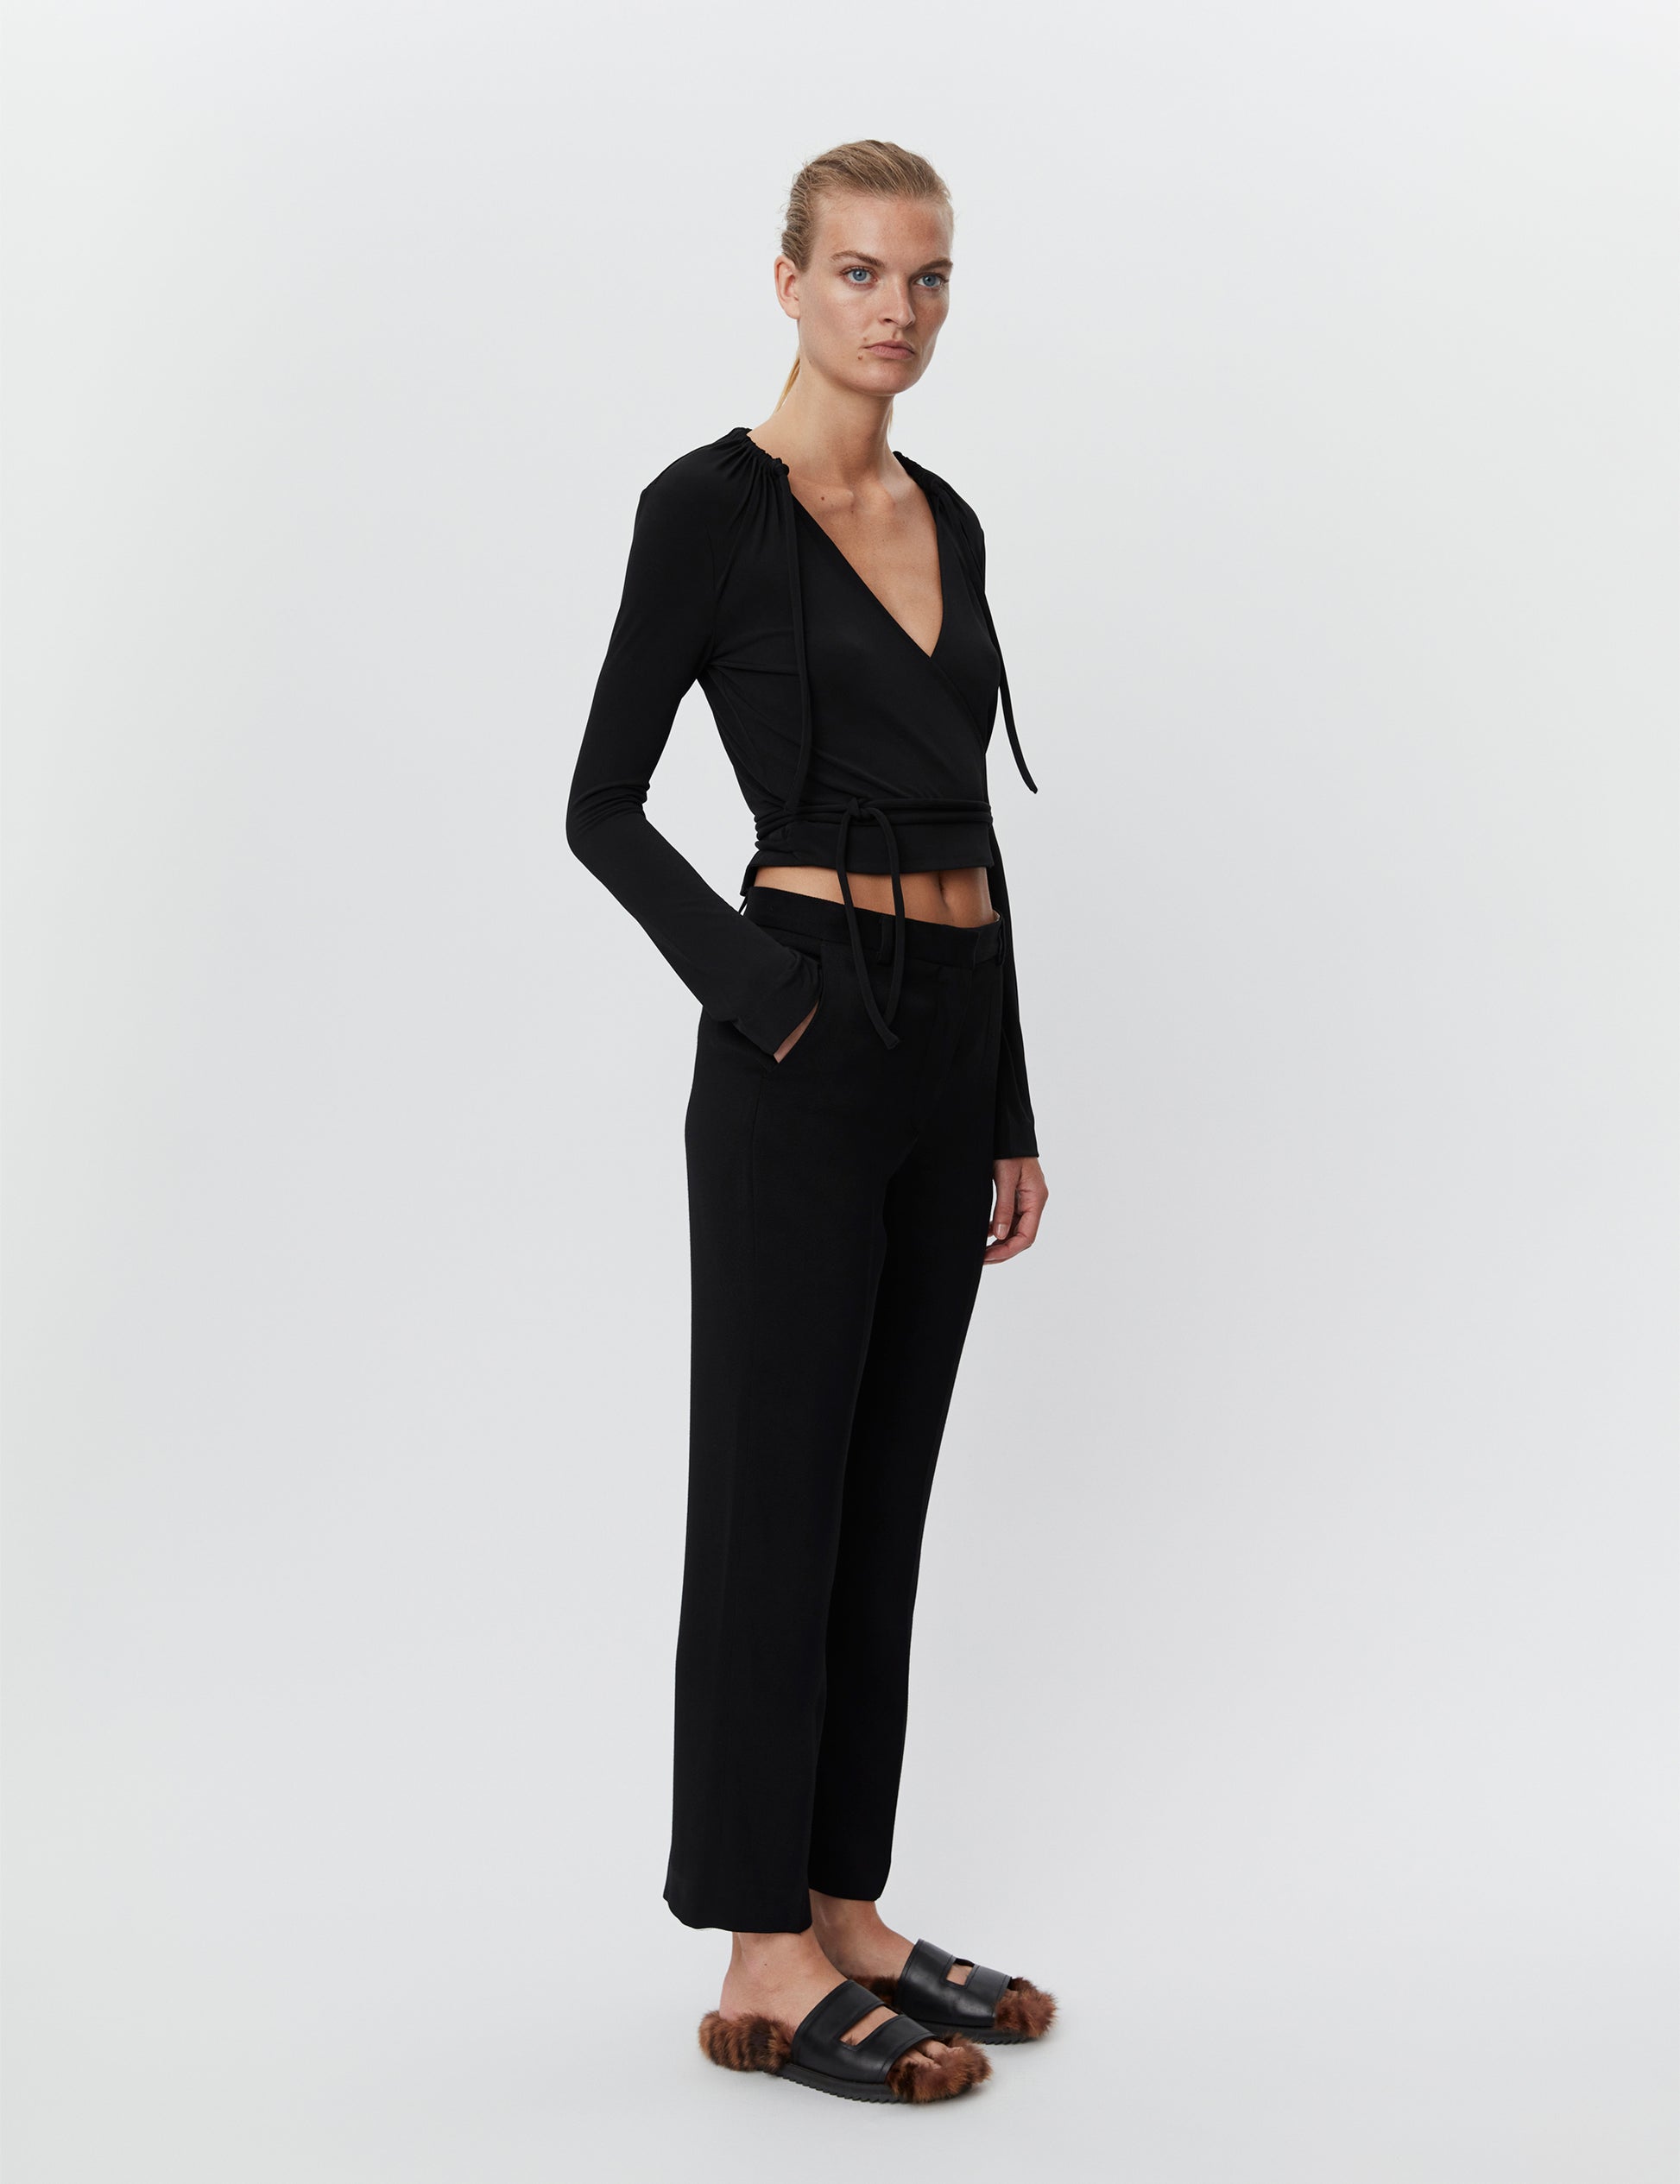 Day Birger - Classic Lady Black Tailored Trousers